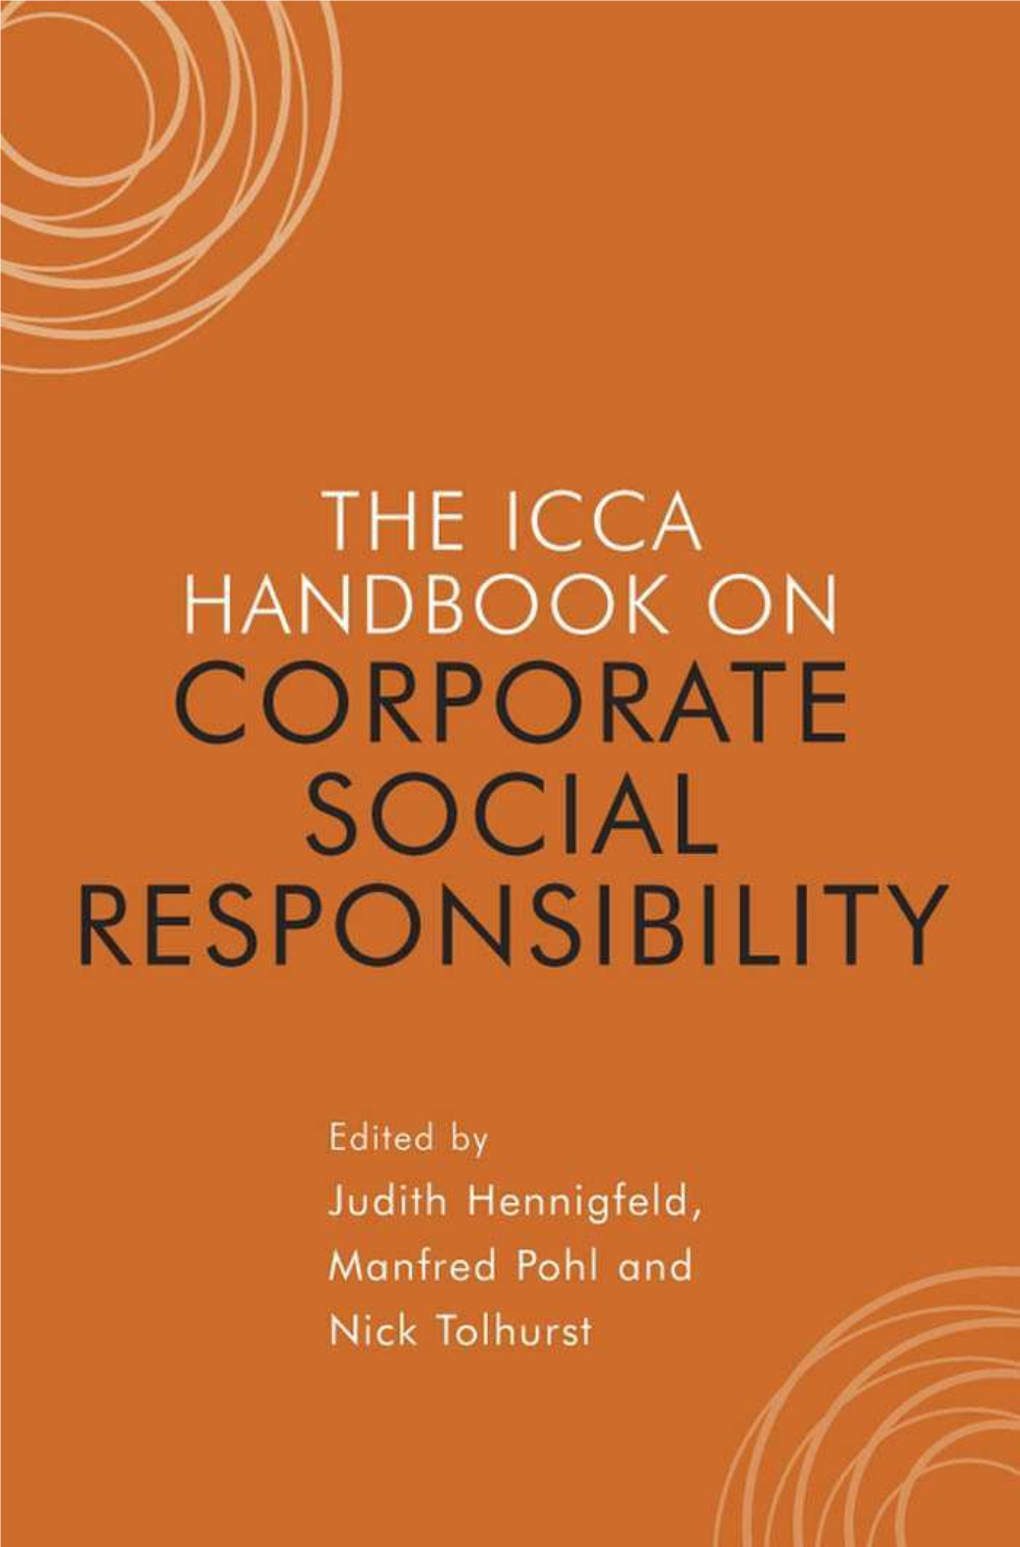 CORPORATE SOCIAL RESPONSIBILITY the ICCA